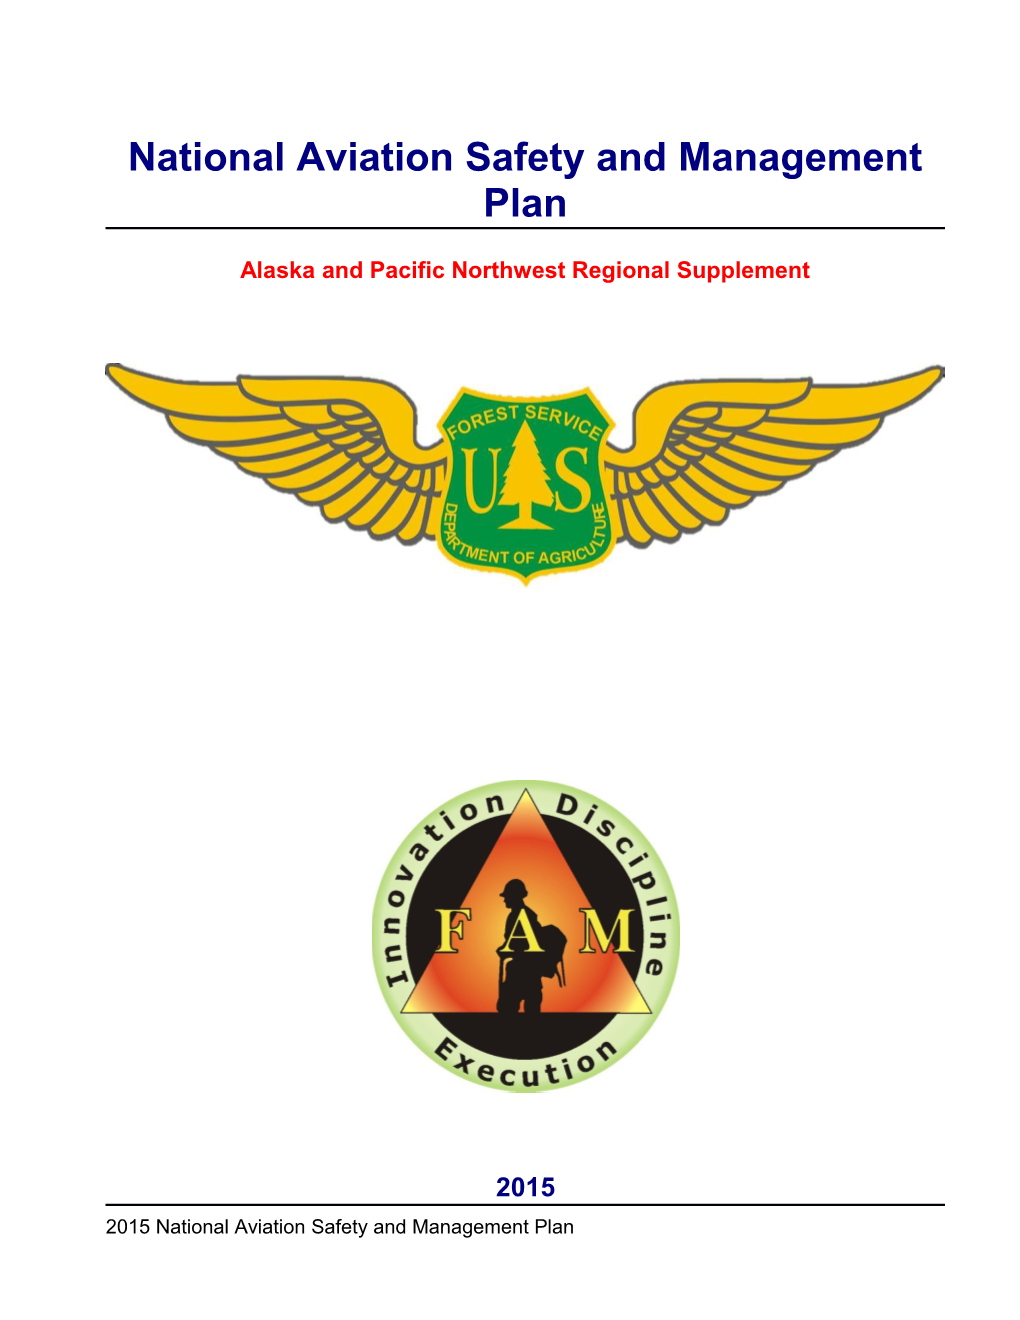 National Aviation Safety and Management Plan